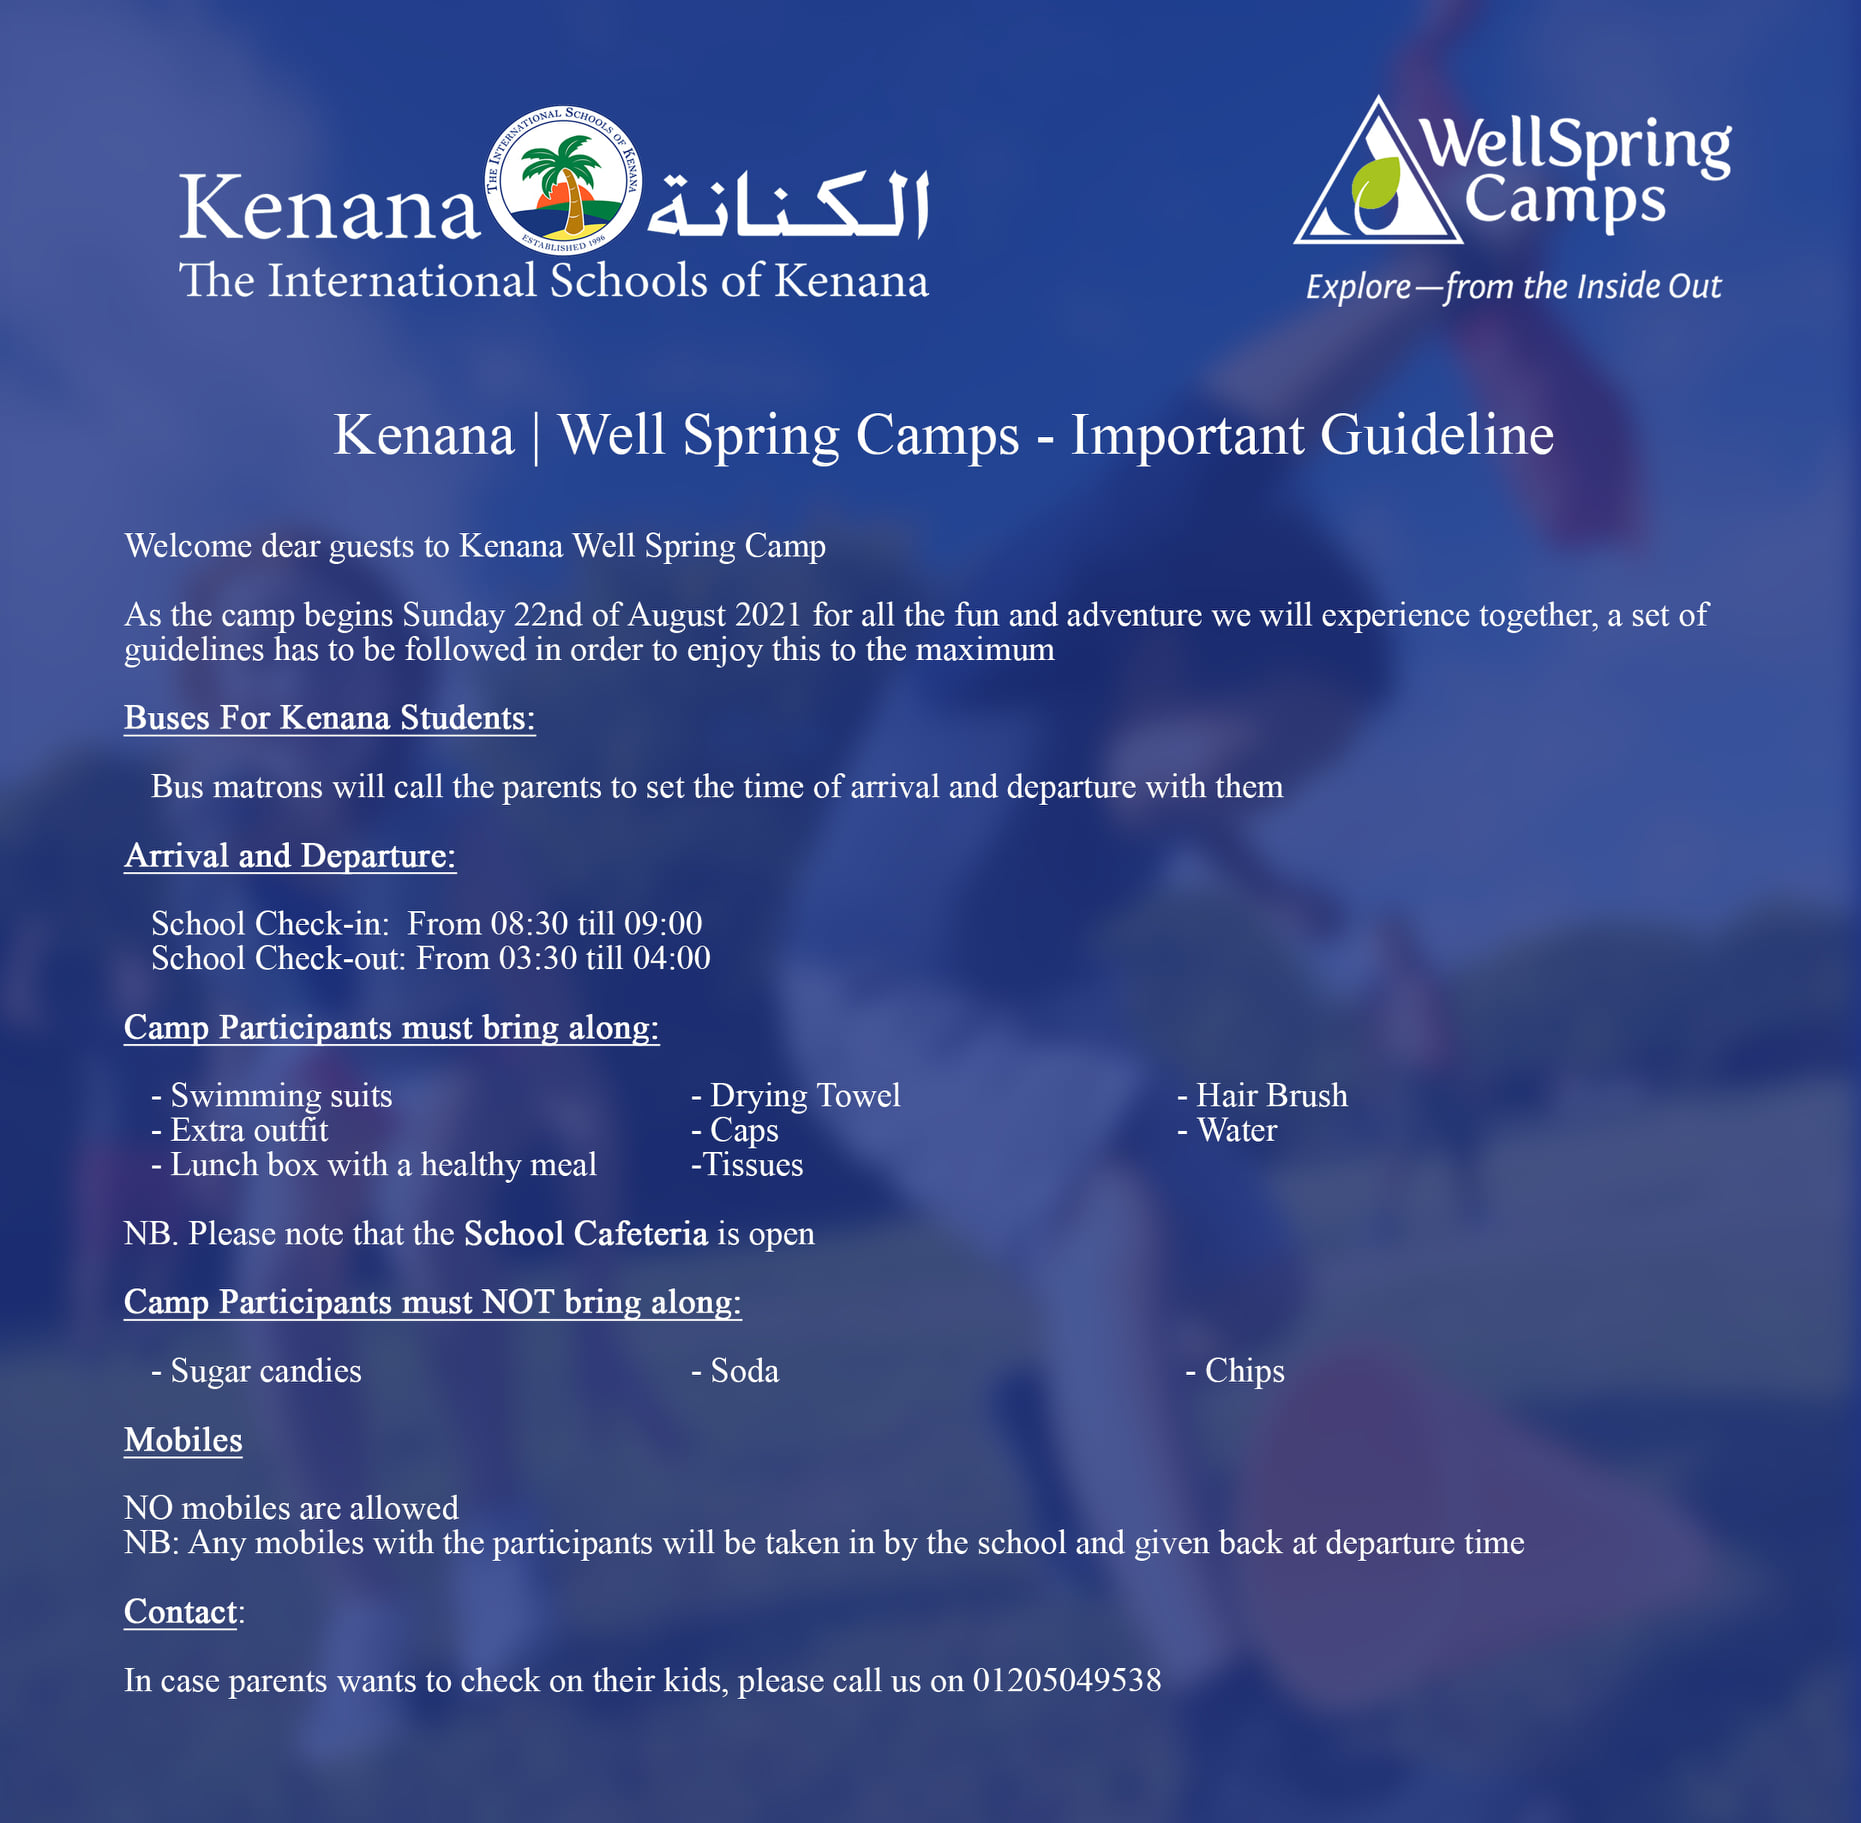 Kenana Well Spring Camp Guidelines